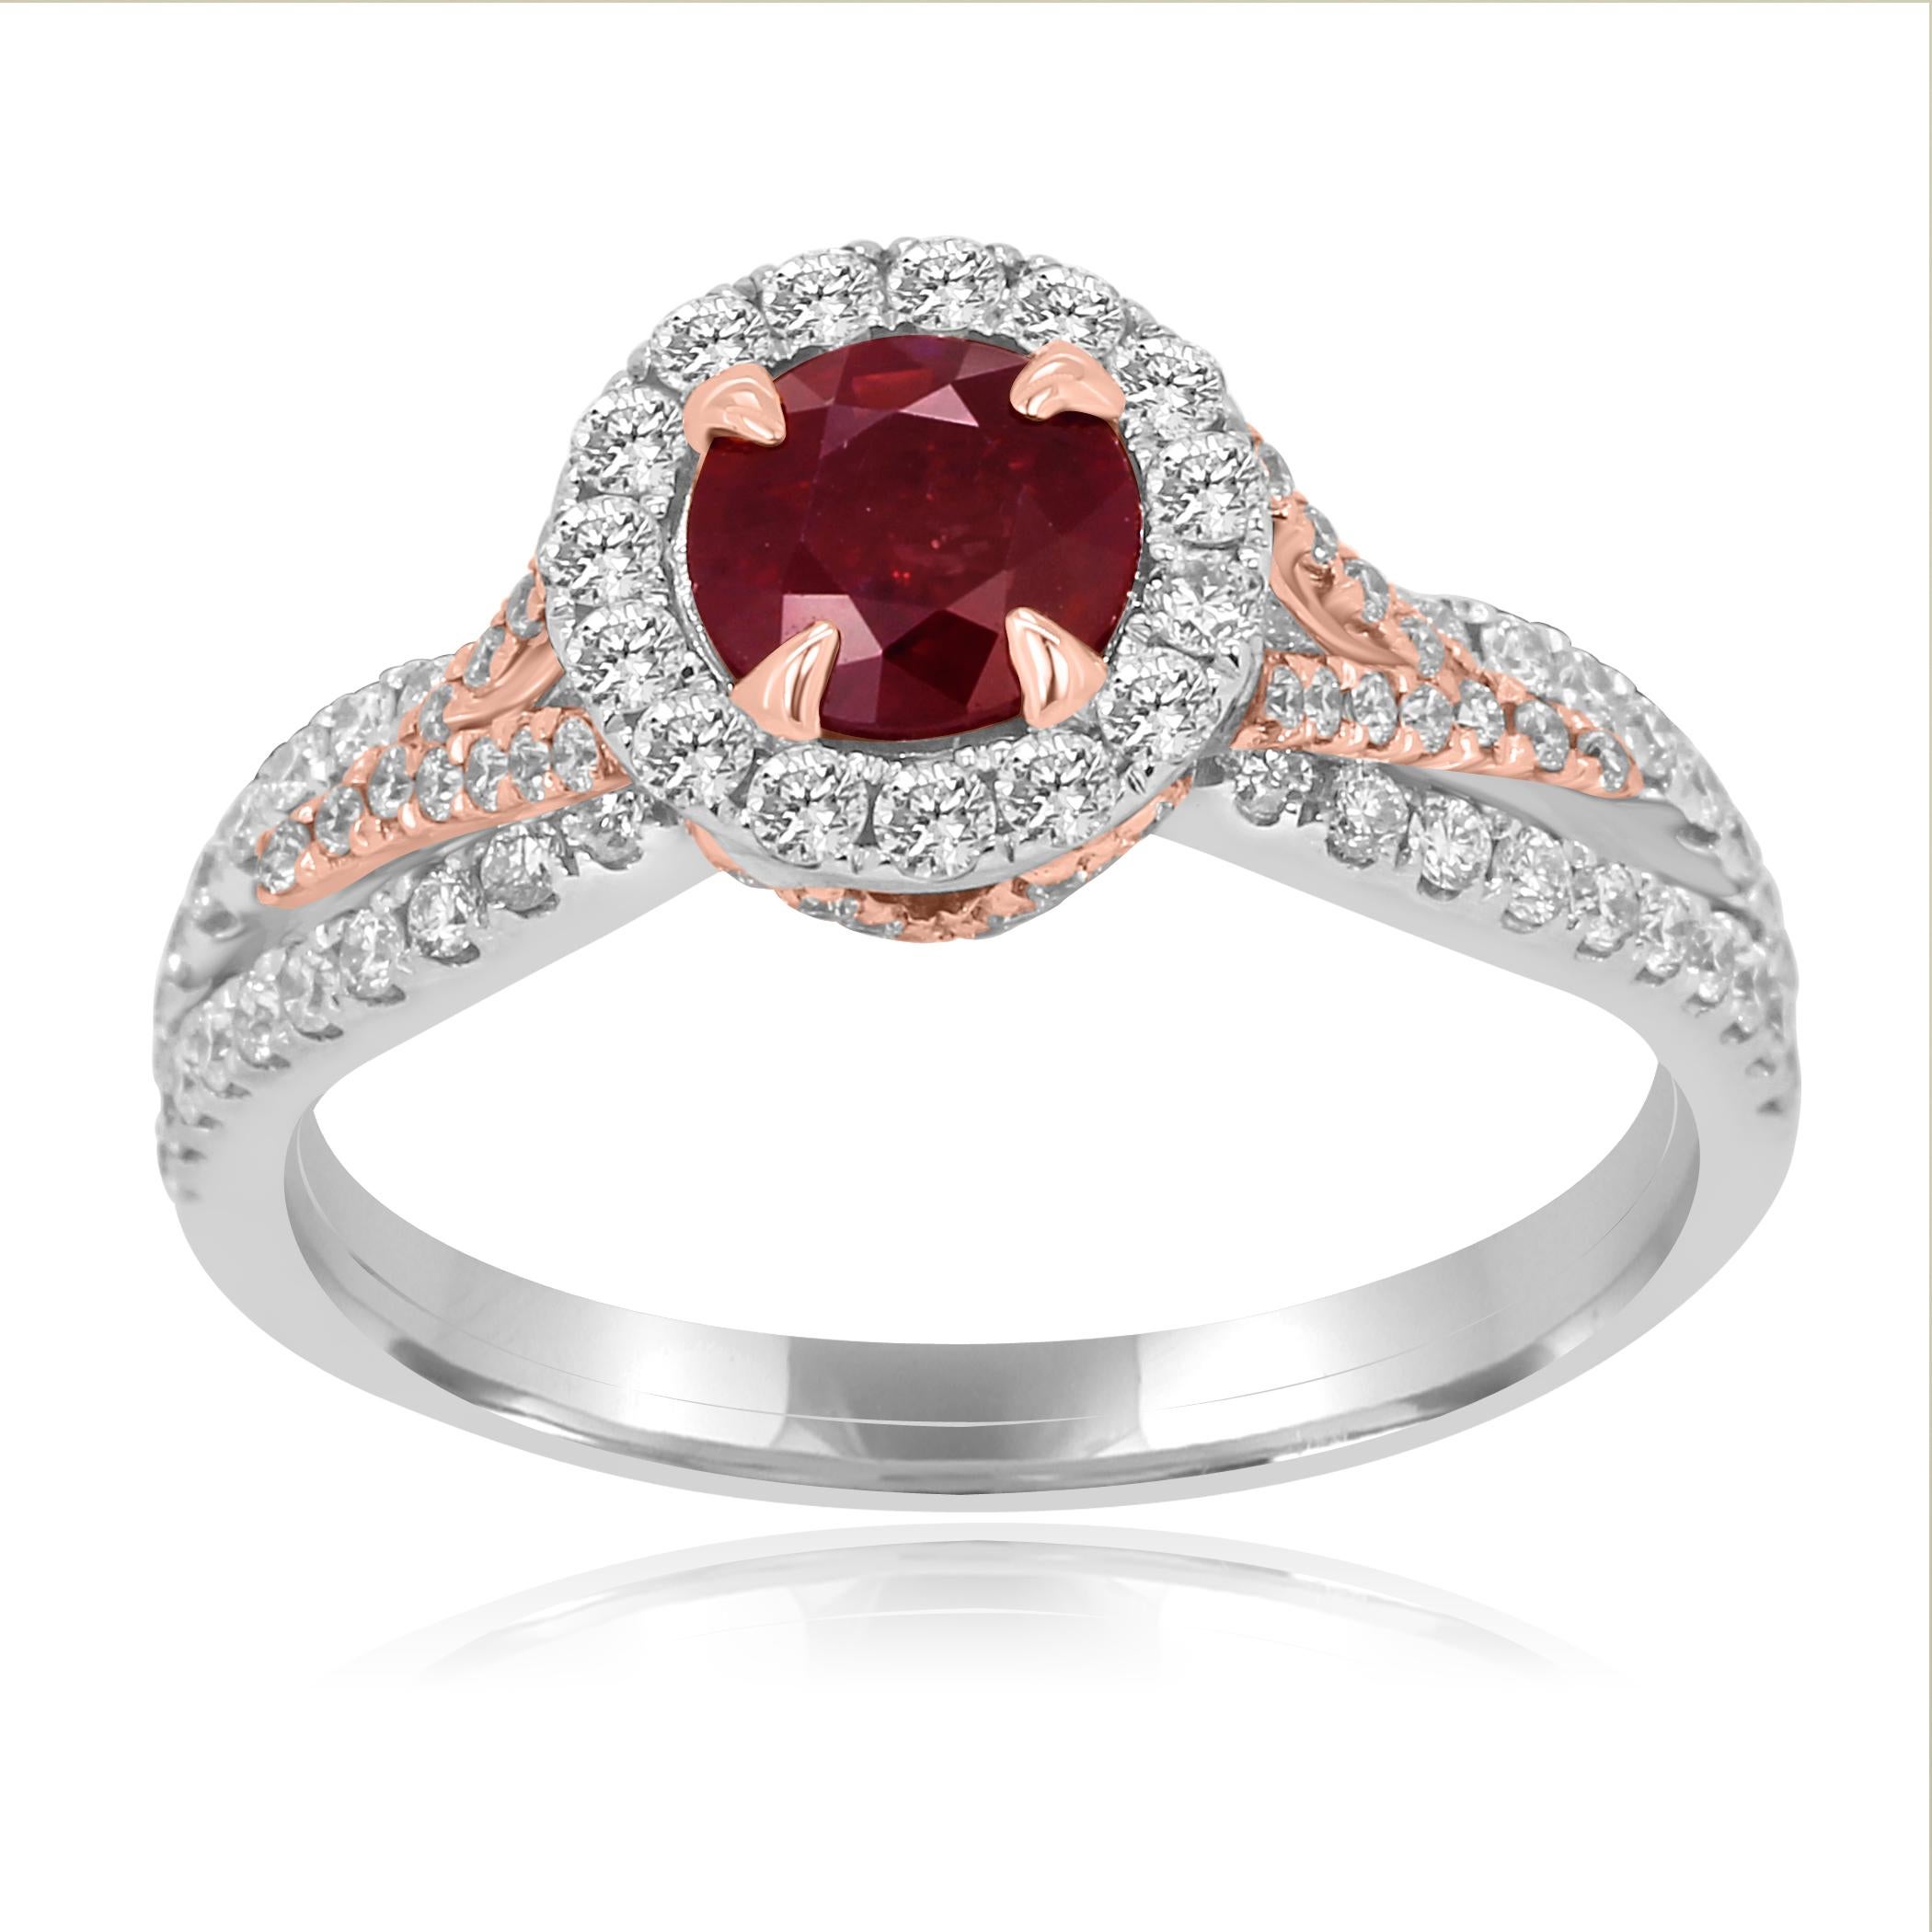 Ruby Round 0.70 Carat encircled in a Single Halo of Colorless VS-SI Round Brilliant Diamonds 0.68 Carat 14K White and Rose Gold Bridal Cocktail Ring.

Center Ruby 0.70 Carat
Total Diamond Weight 0.68 Carat